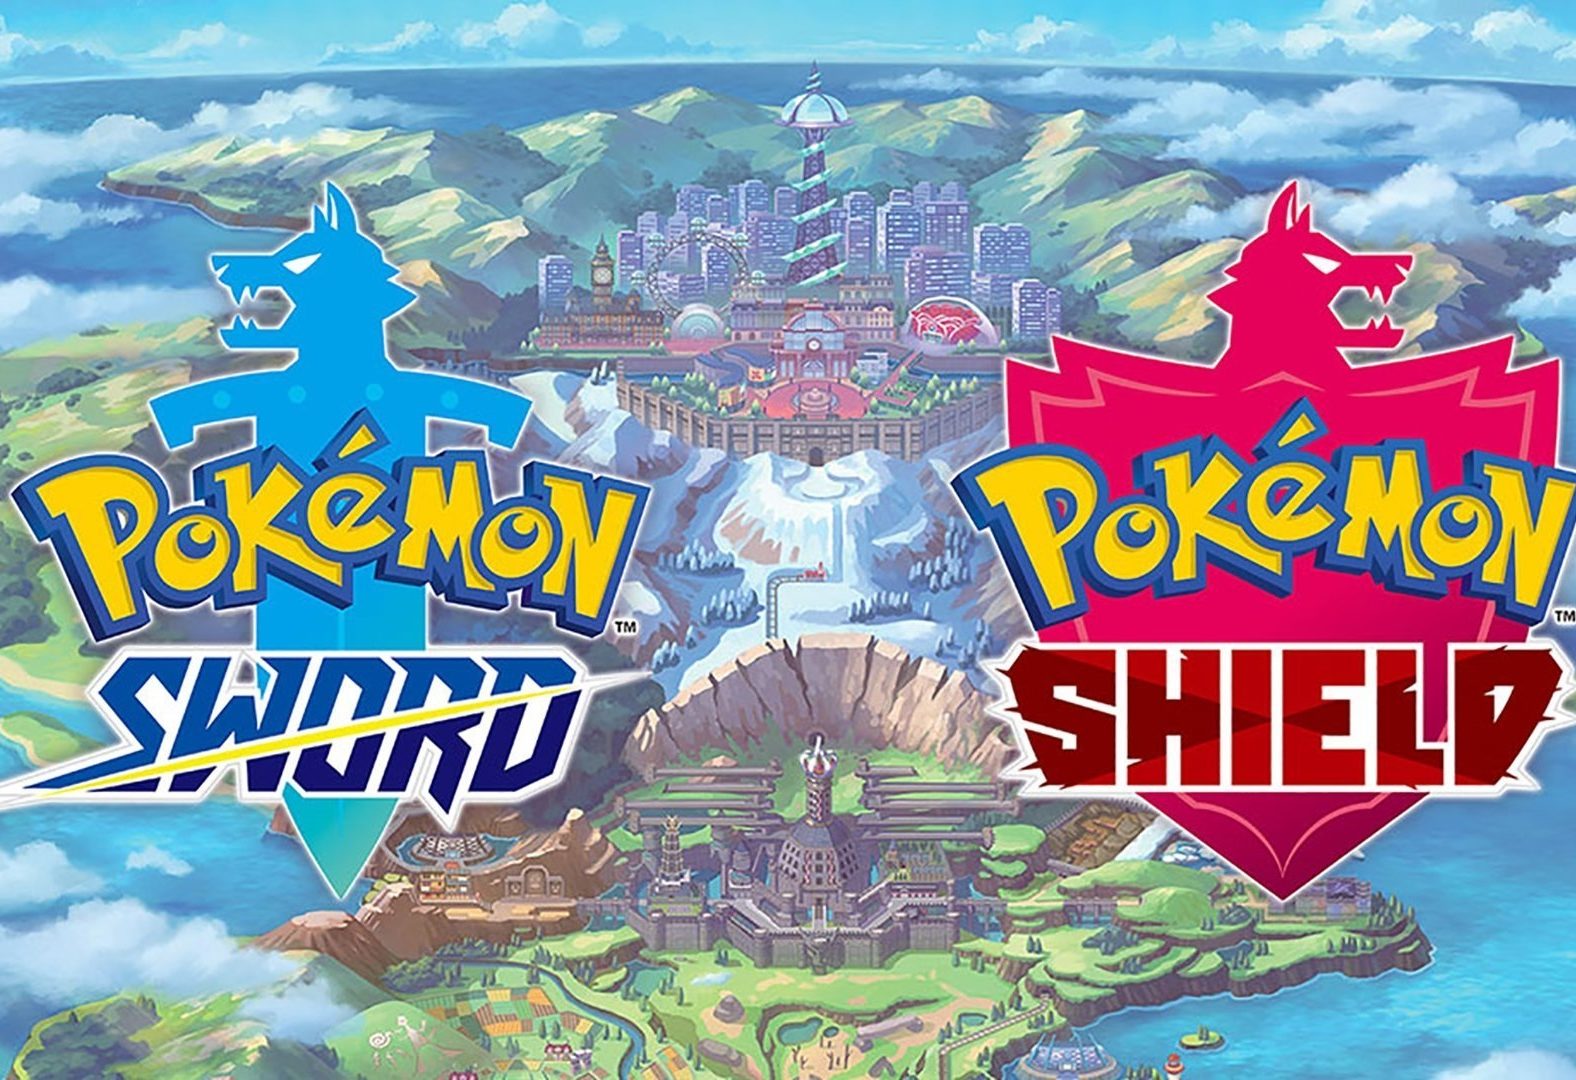 Pokémon: Sword *Demo* Gaming REVIEWS (Nintendo – Switch) LILITHIA – Review and Shield